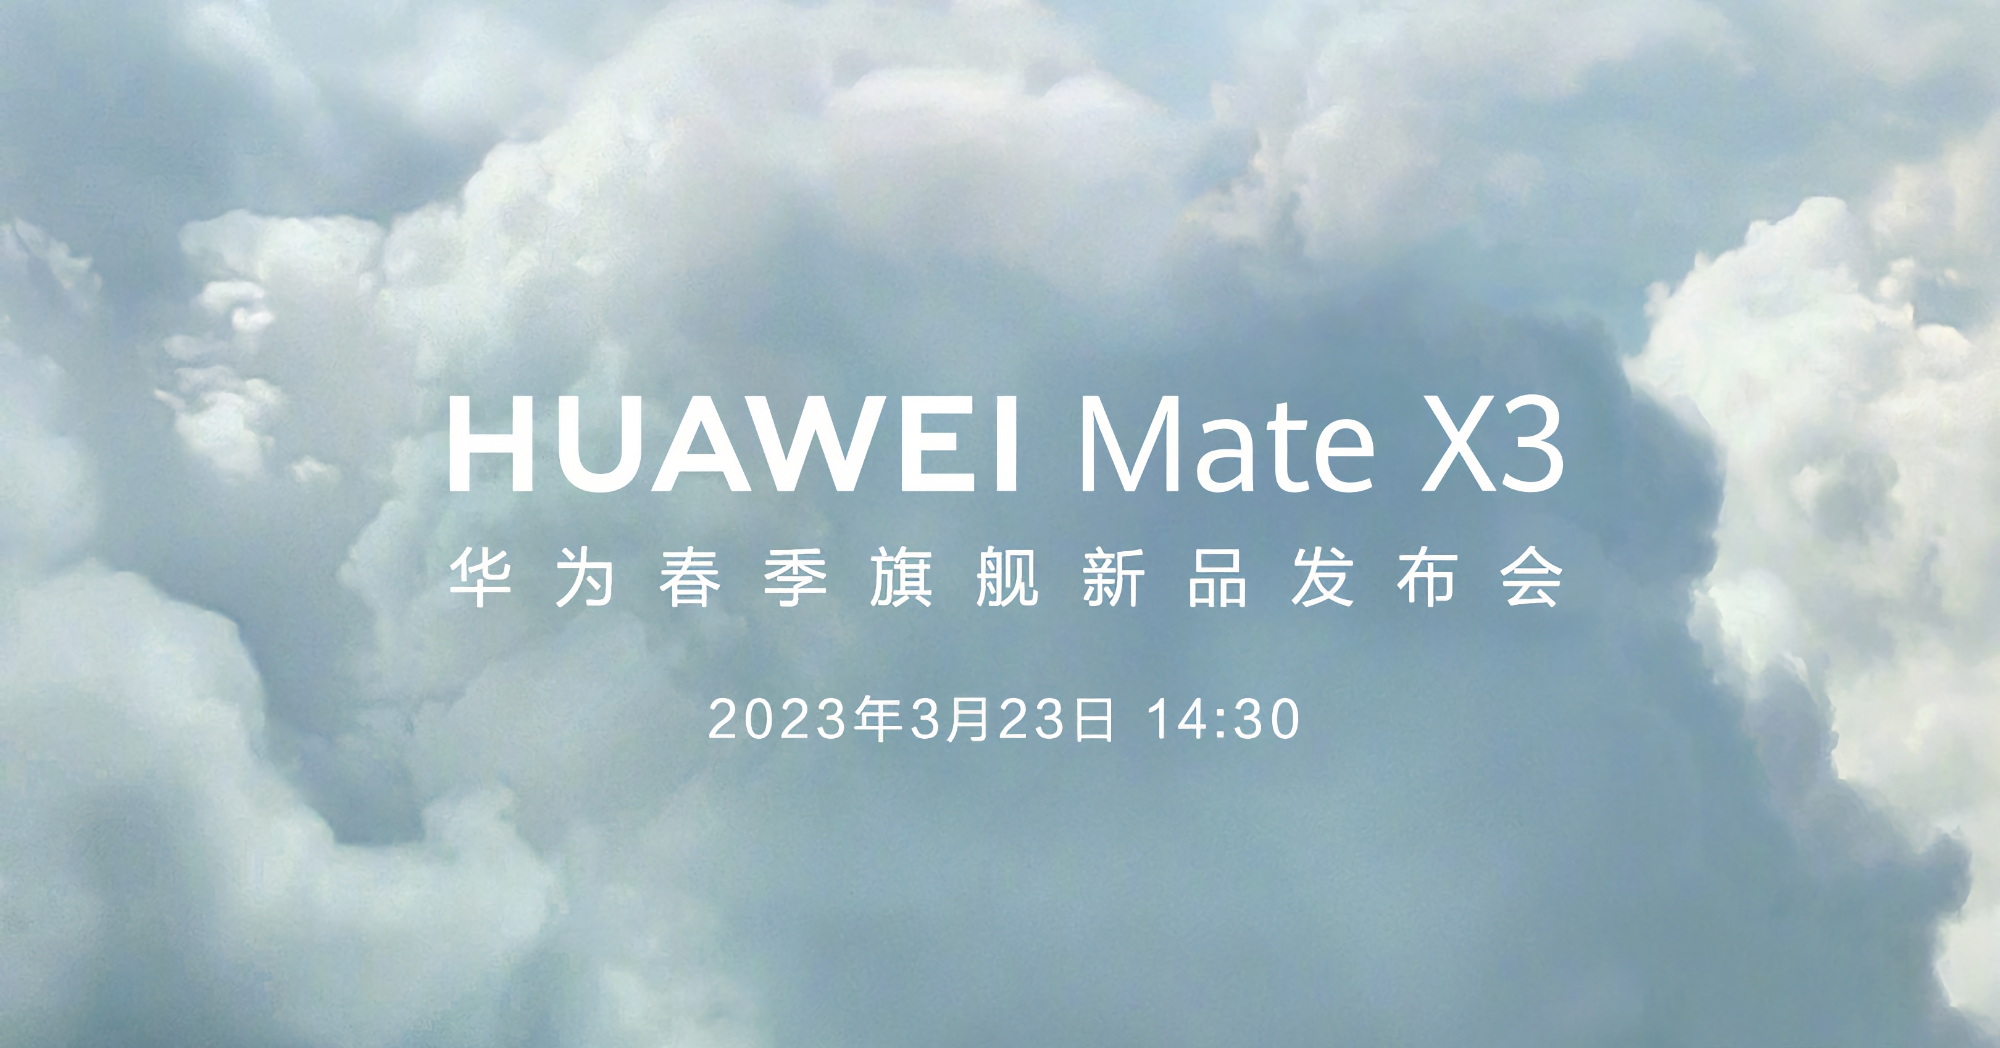 Confirmed: Huawei Mate X3 foldable smartphone to debut at launch on 23 March